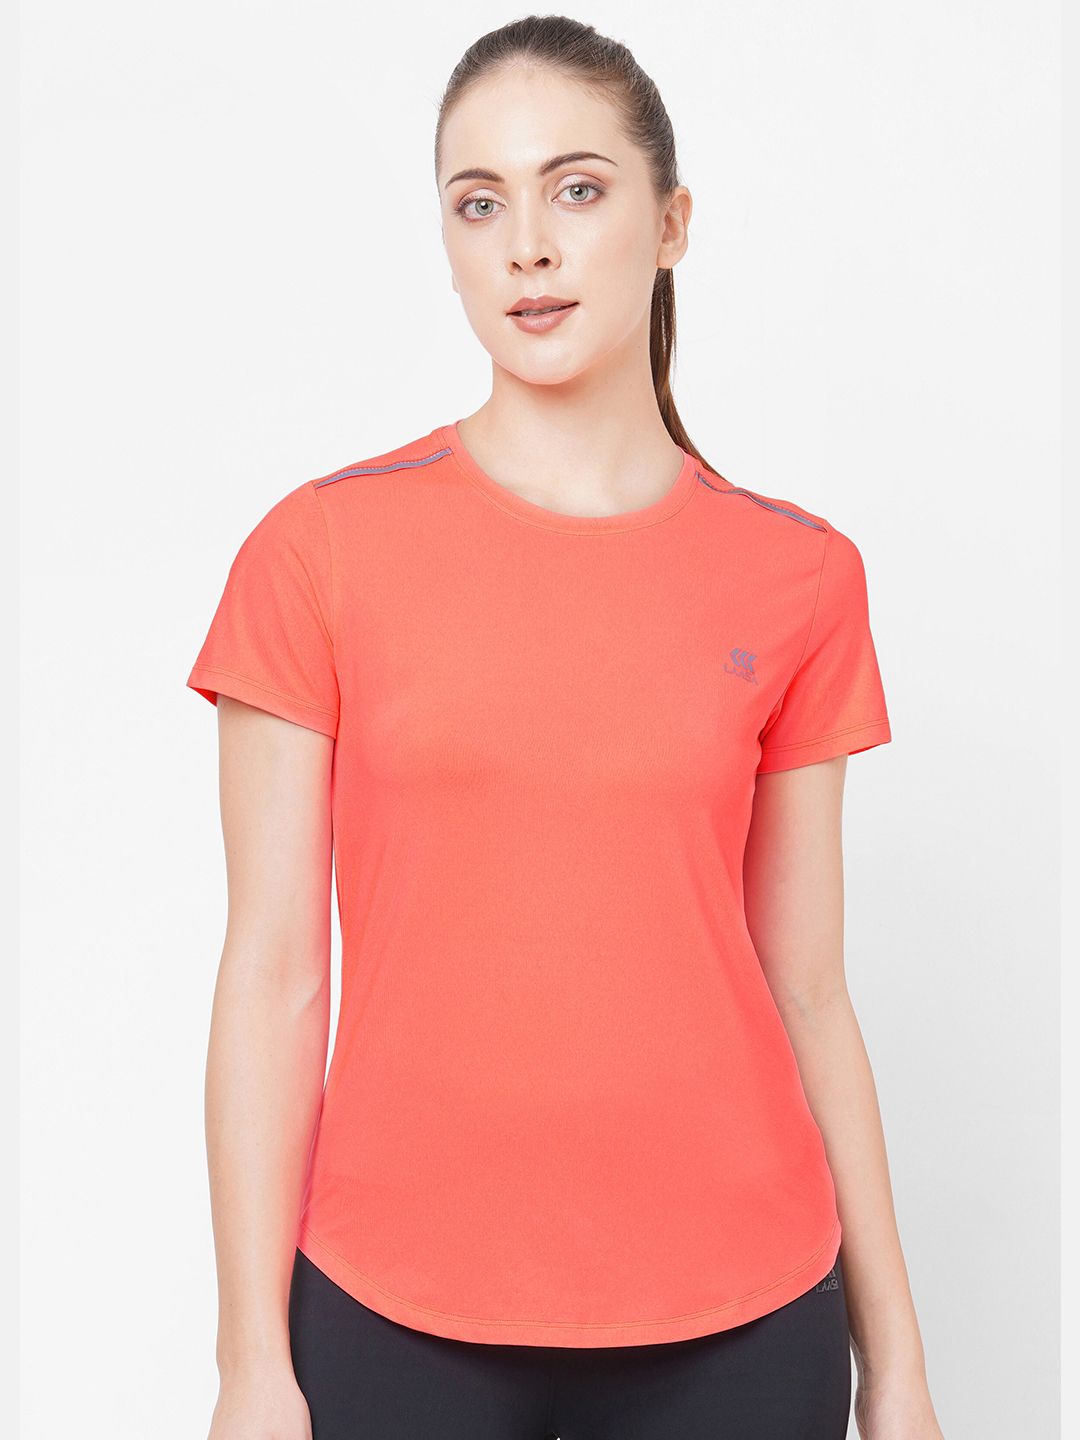 LAASA SPORTS Women Peach-Coloured Slim Fit Gym T-shirt Price in India